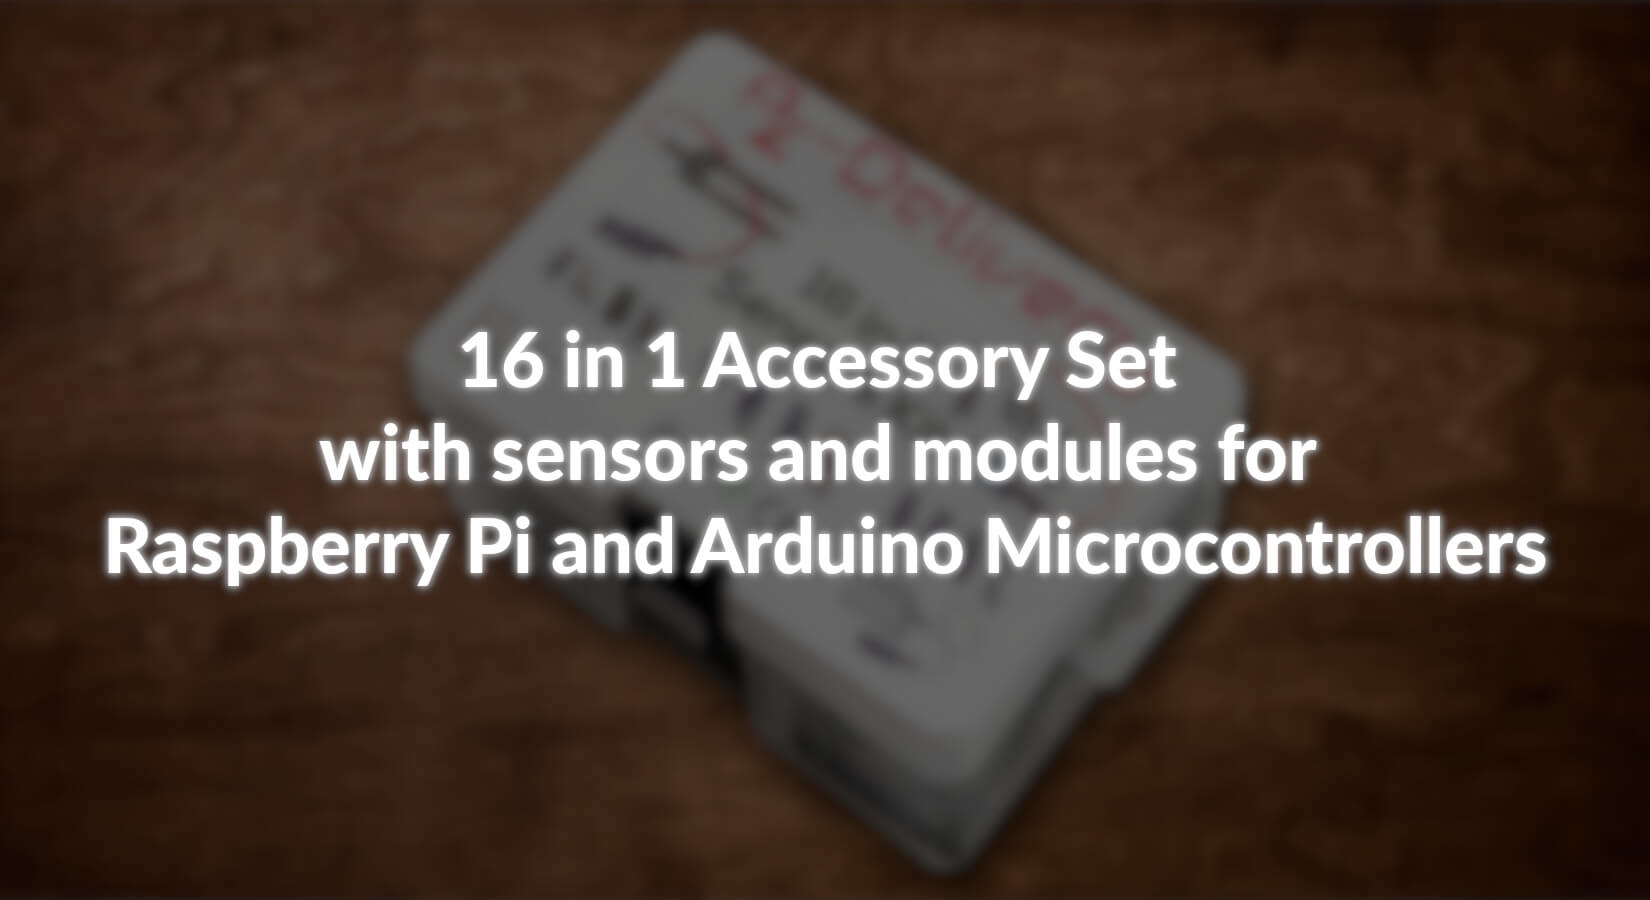 16 in 1 Accessory Set with sensors and modules for Raspberry Pi and Arduino Microcontrollers - AZ-Delivery